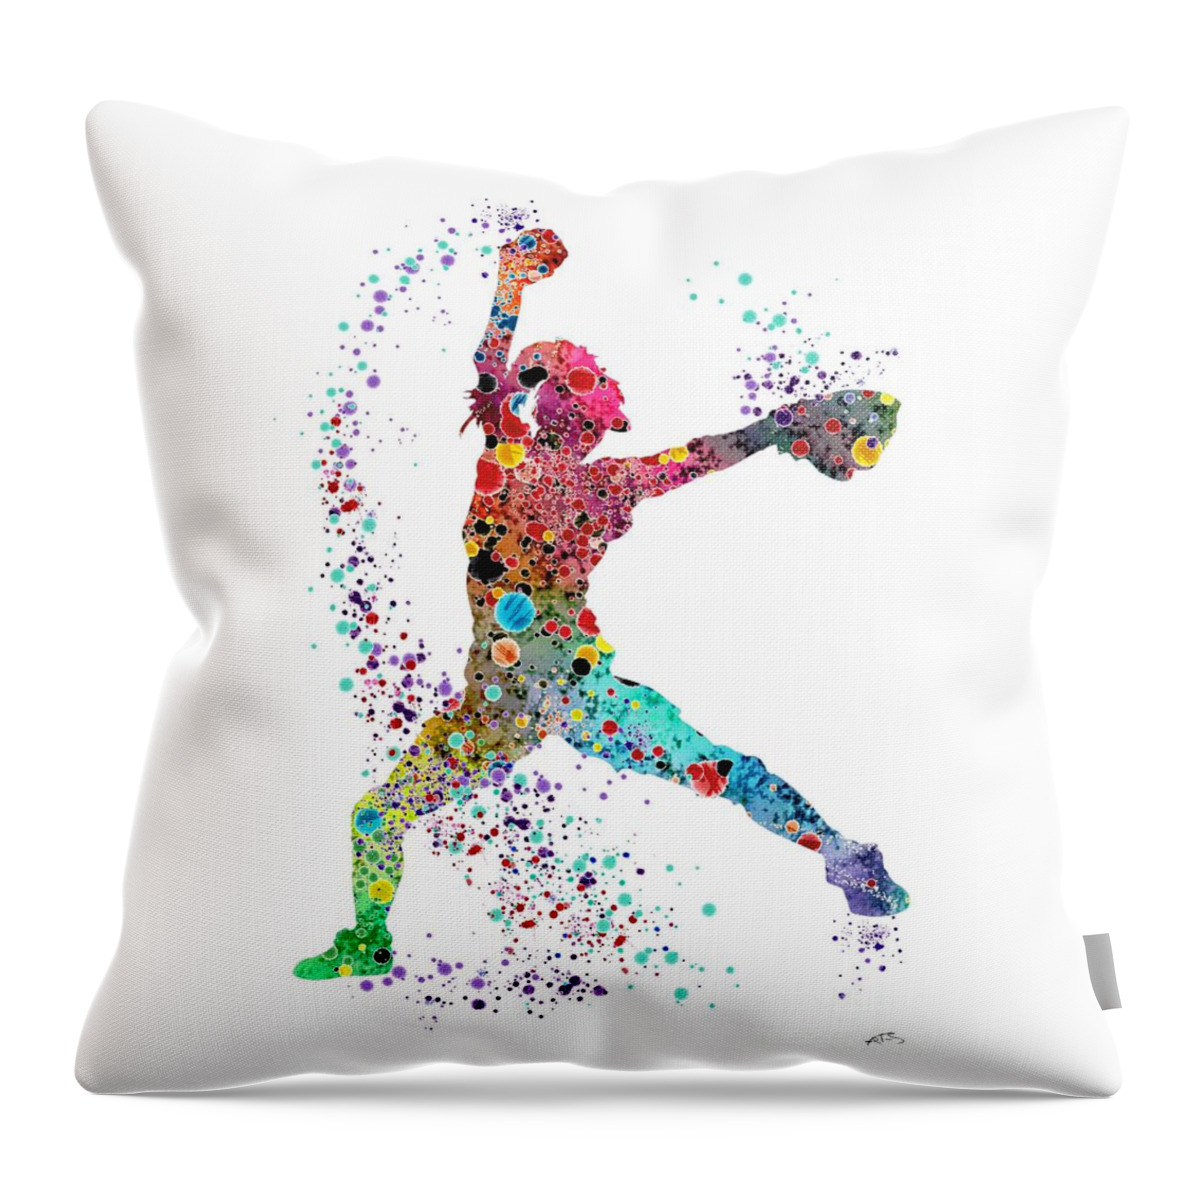 Softball Watercolor Throw Pillow featuring the digital art Baseball Softball Pitcher Watercolor Print by White Lotus